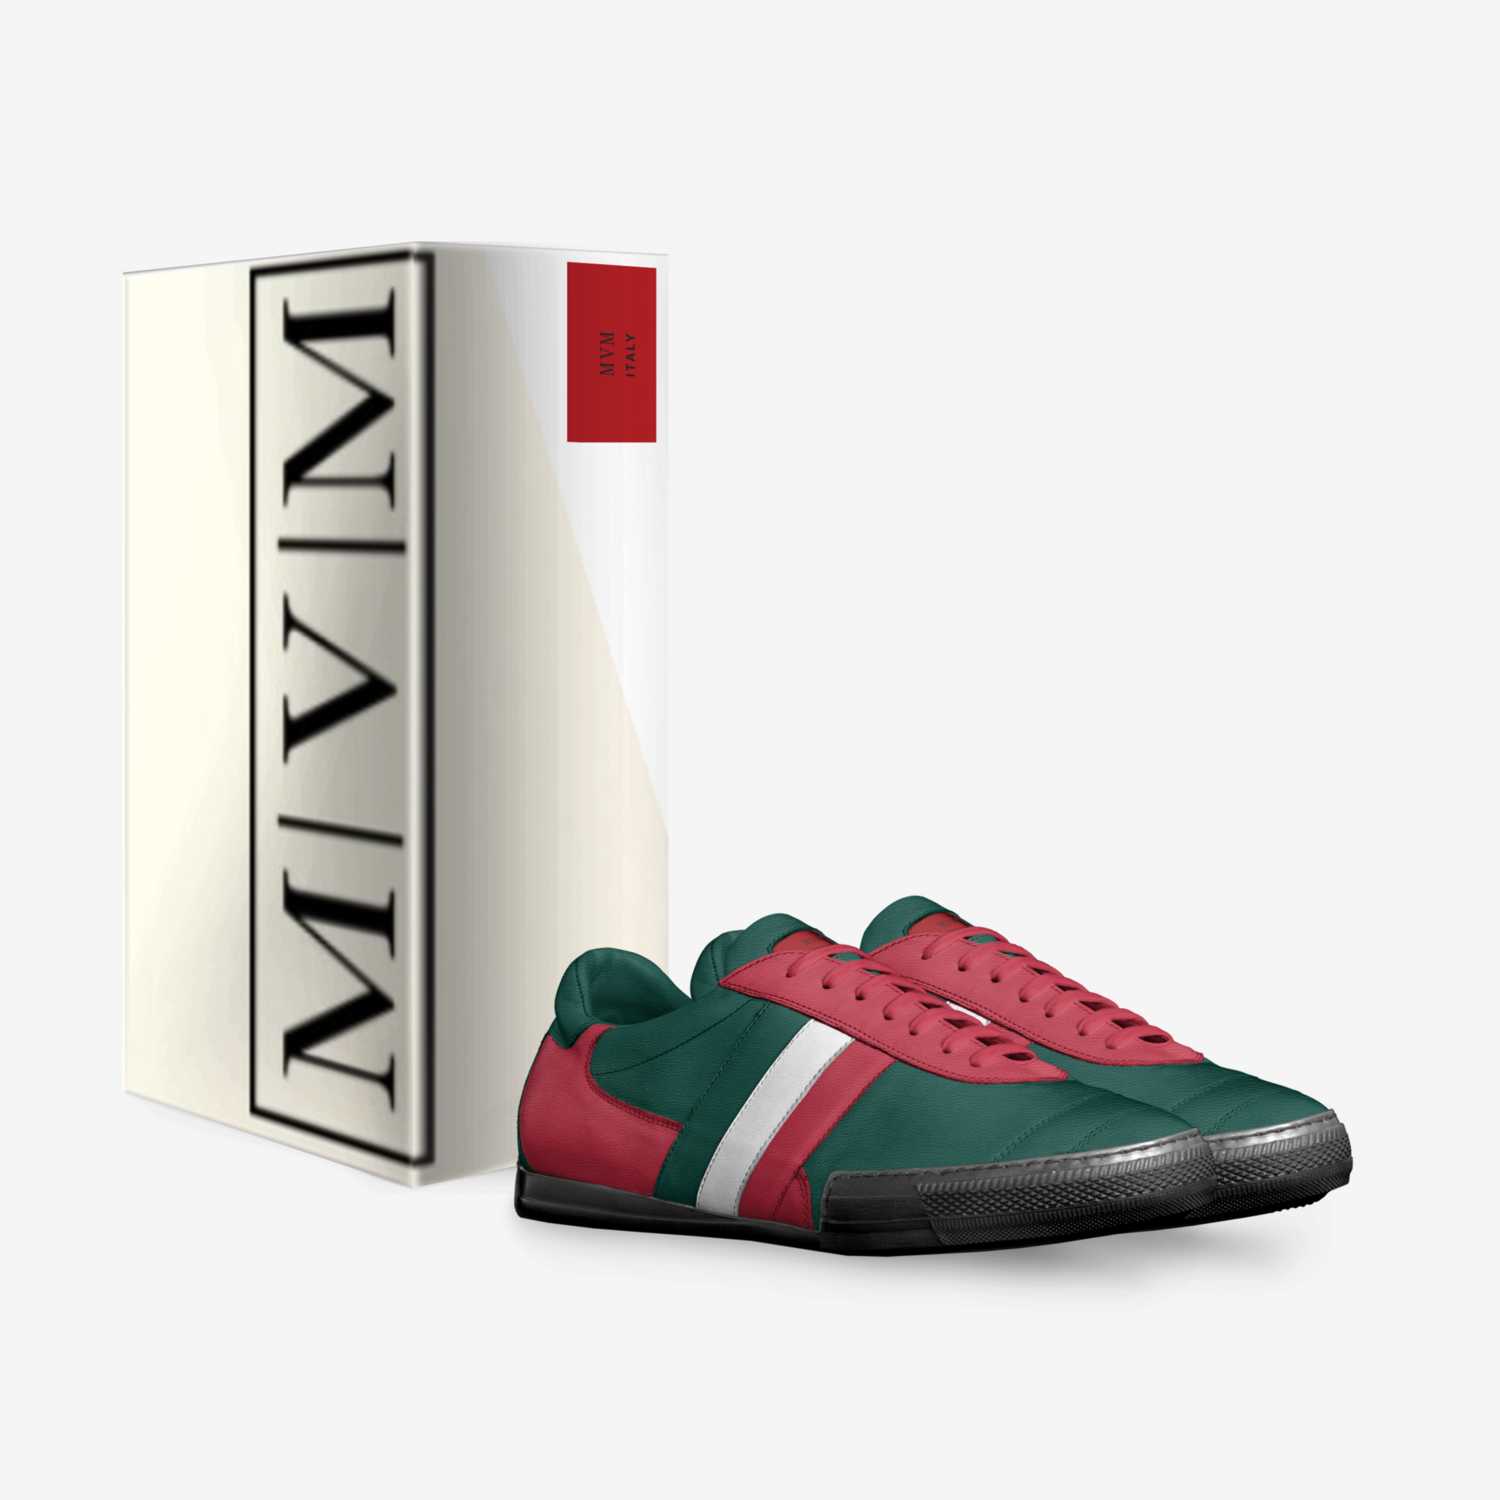 MVM custom made in Italy shoes by Markese Wright | Box view